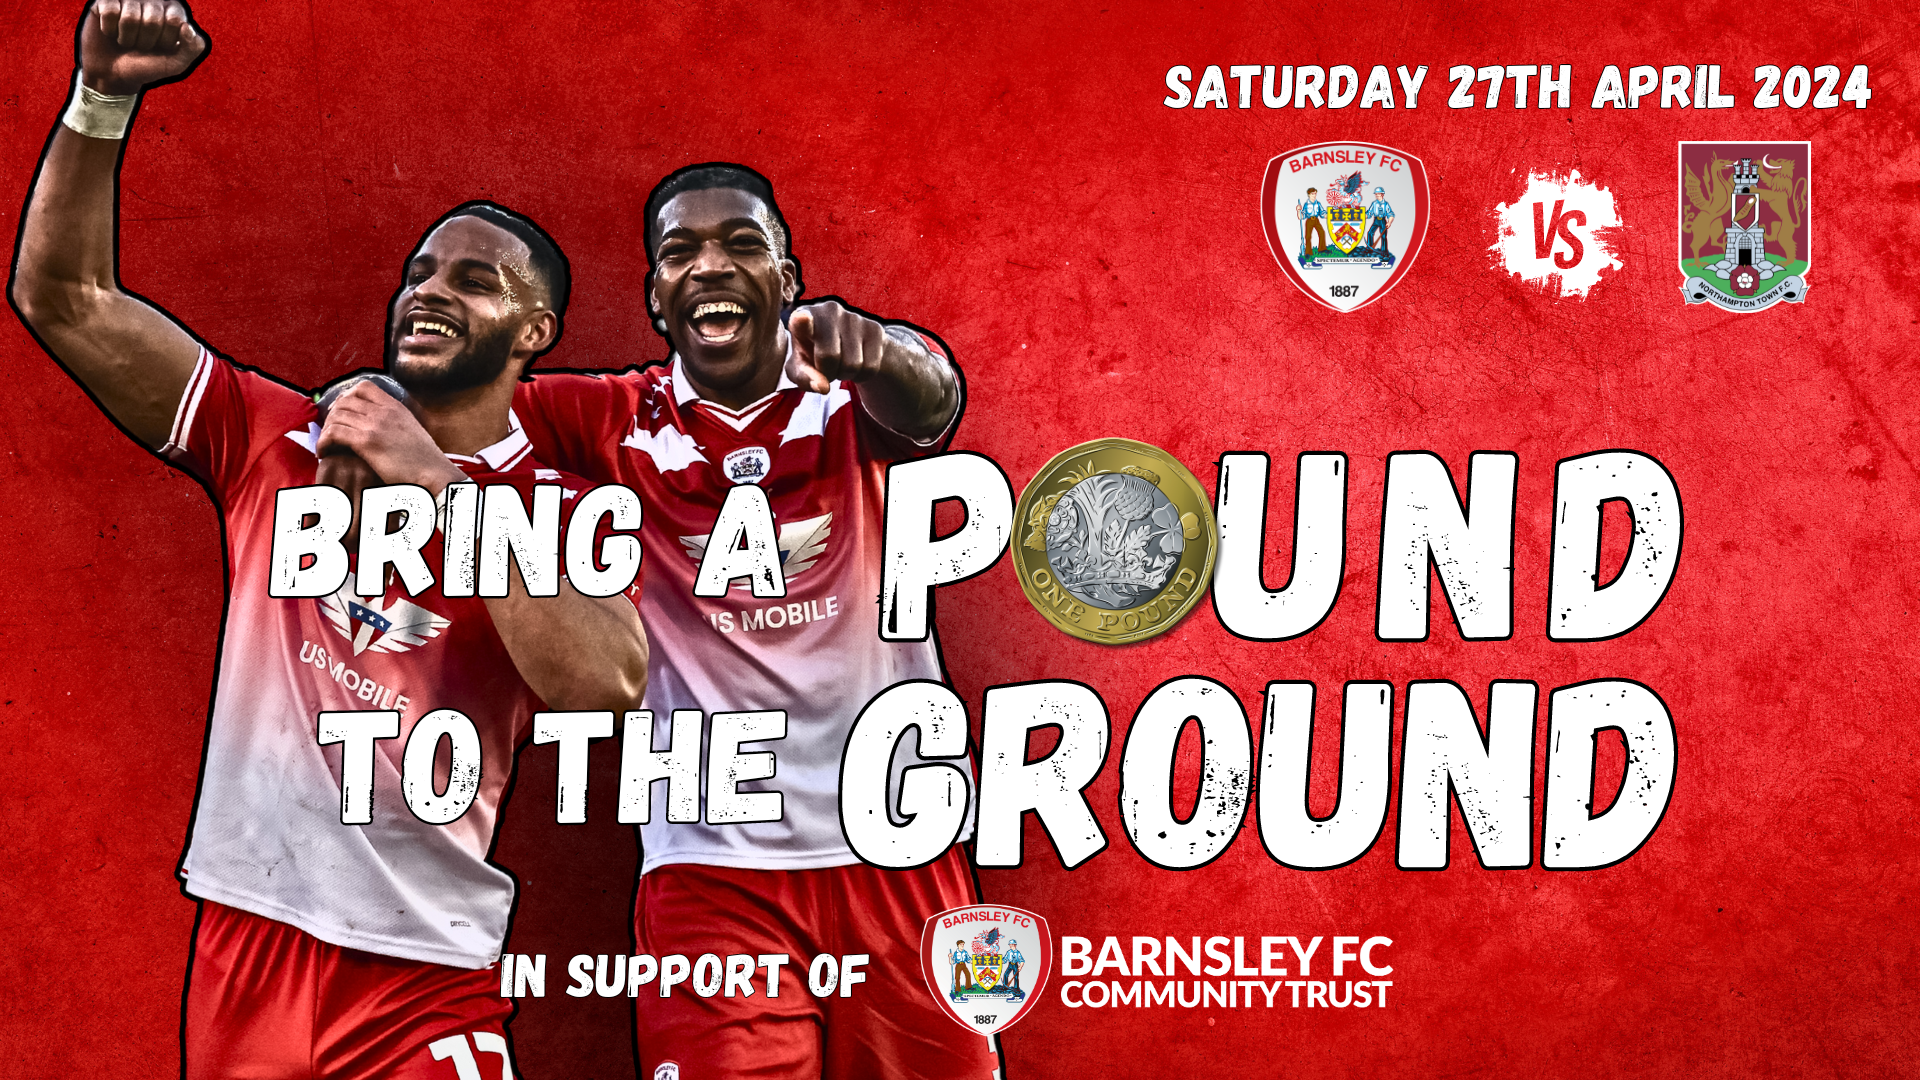 Bring a Pound to the Ground in Support of Barnsley FC Community Trust